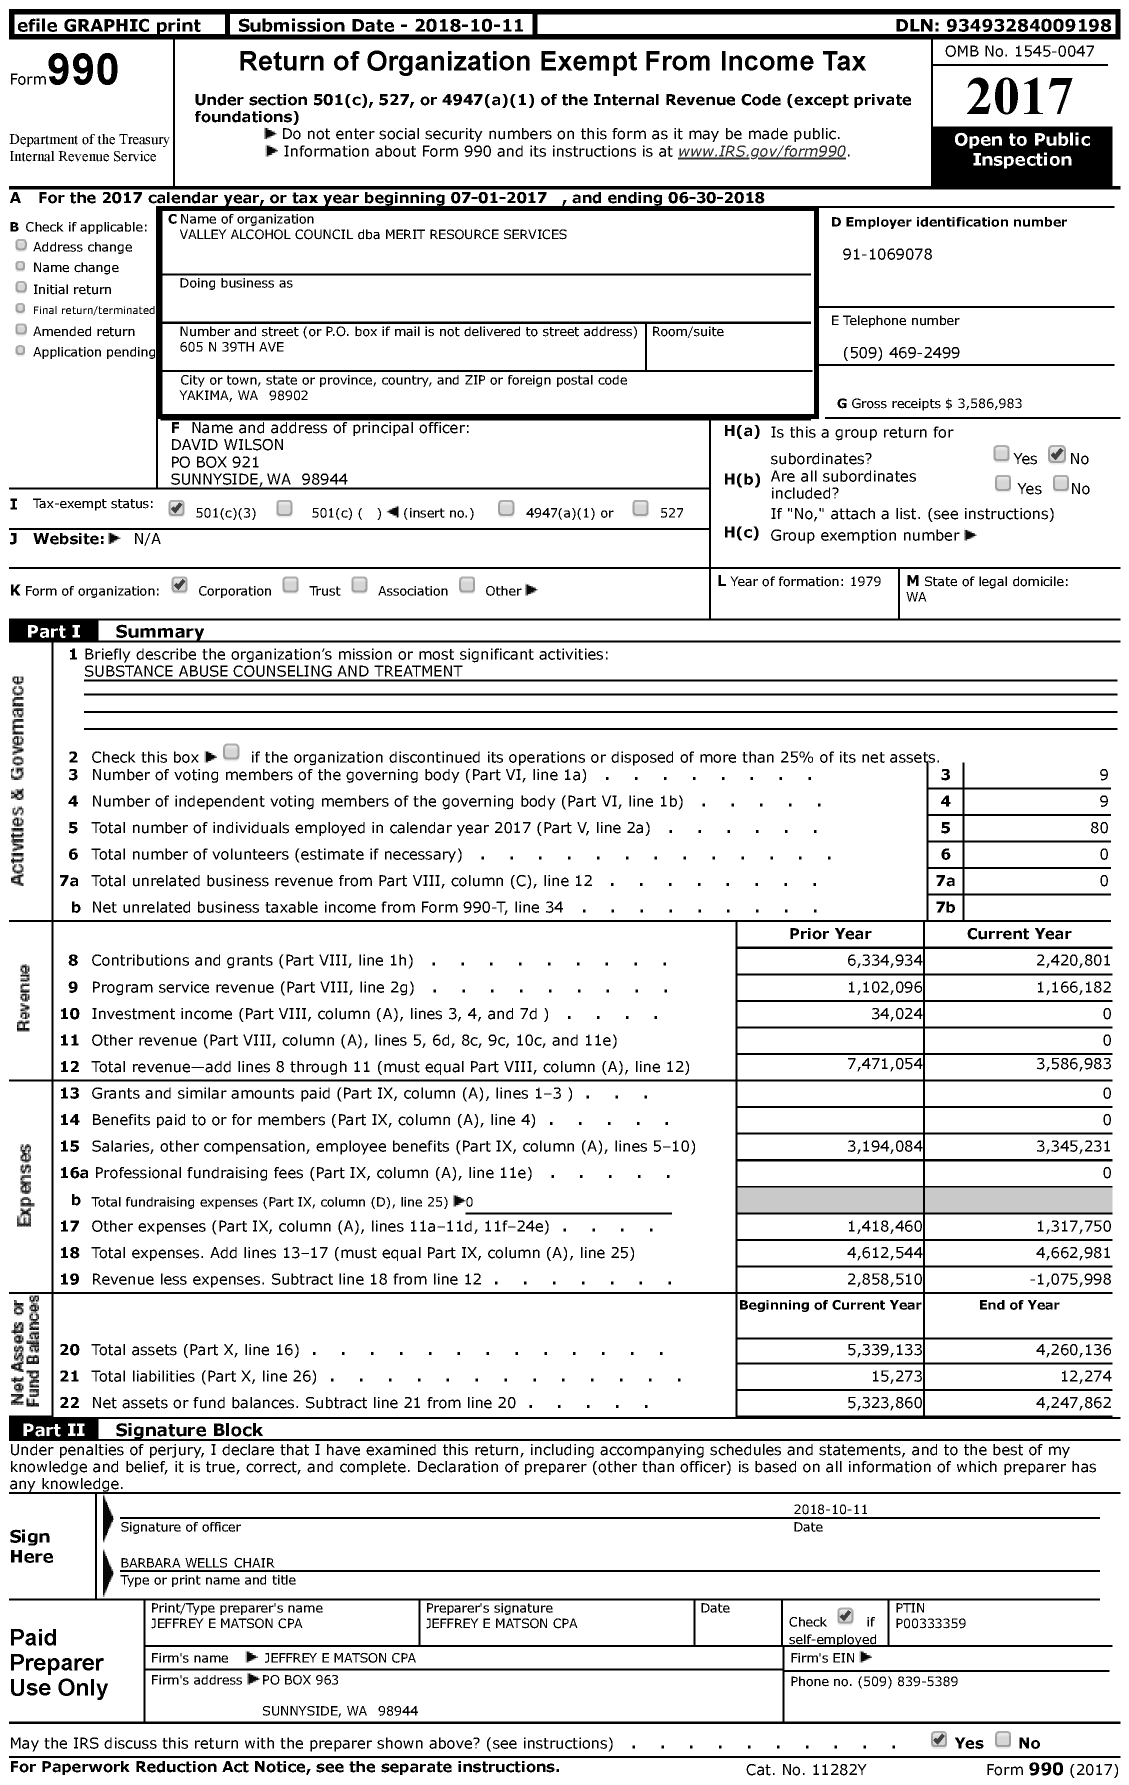 Image of first page of 2017 Form 990 for Merit Resource Services